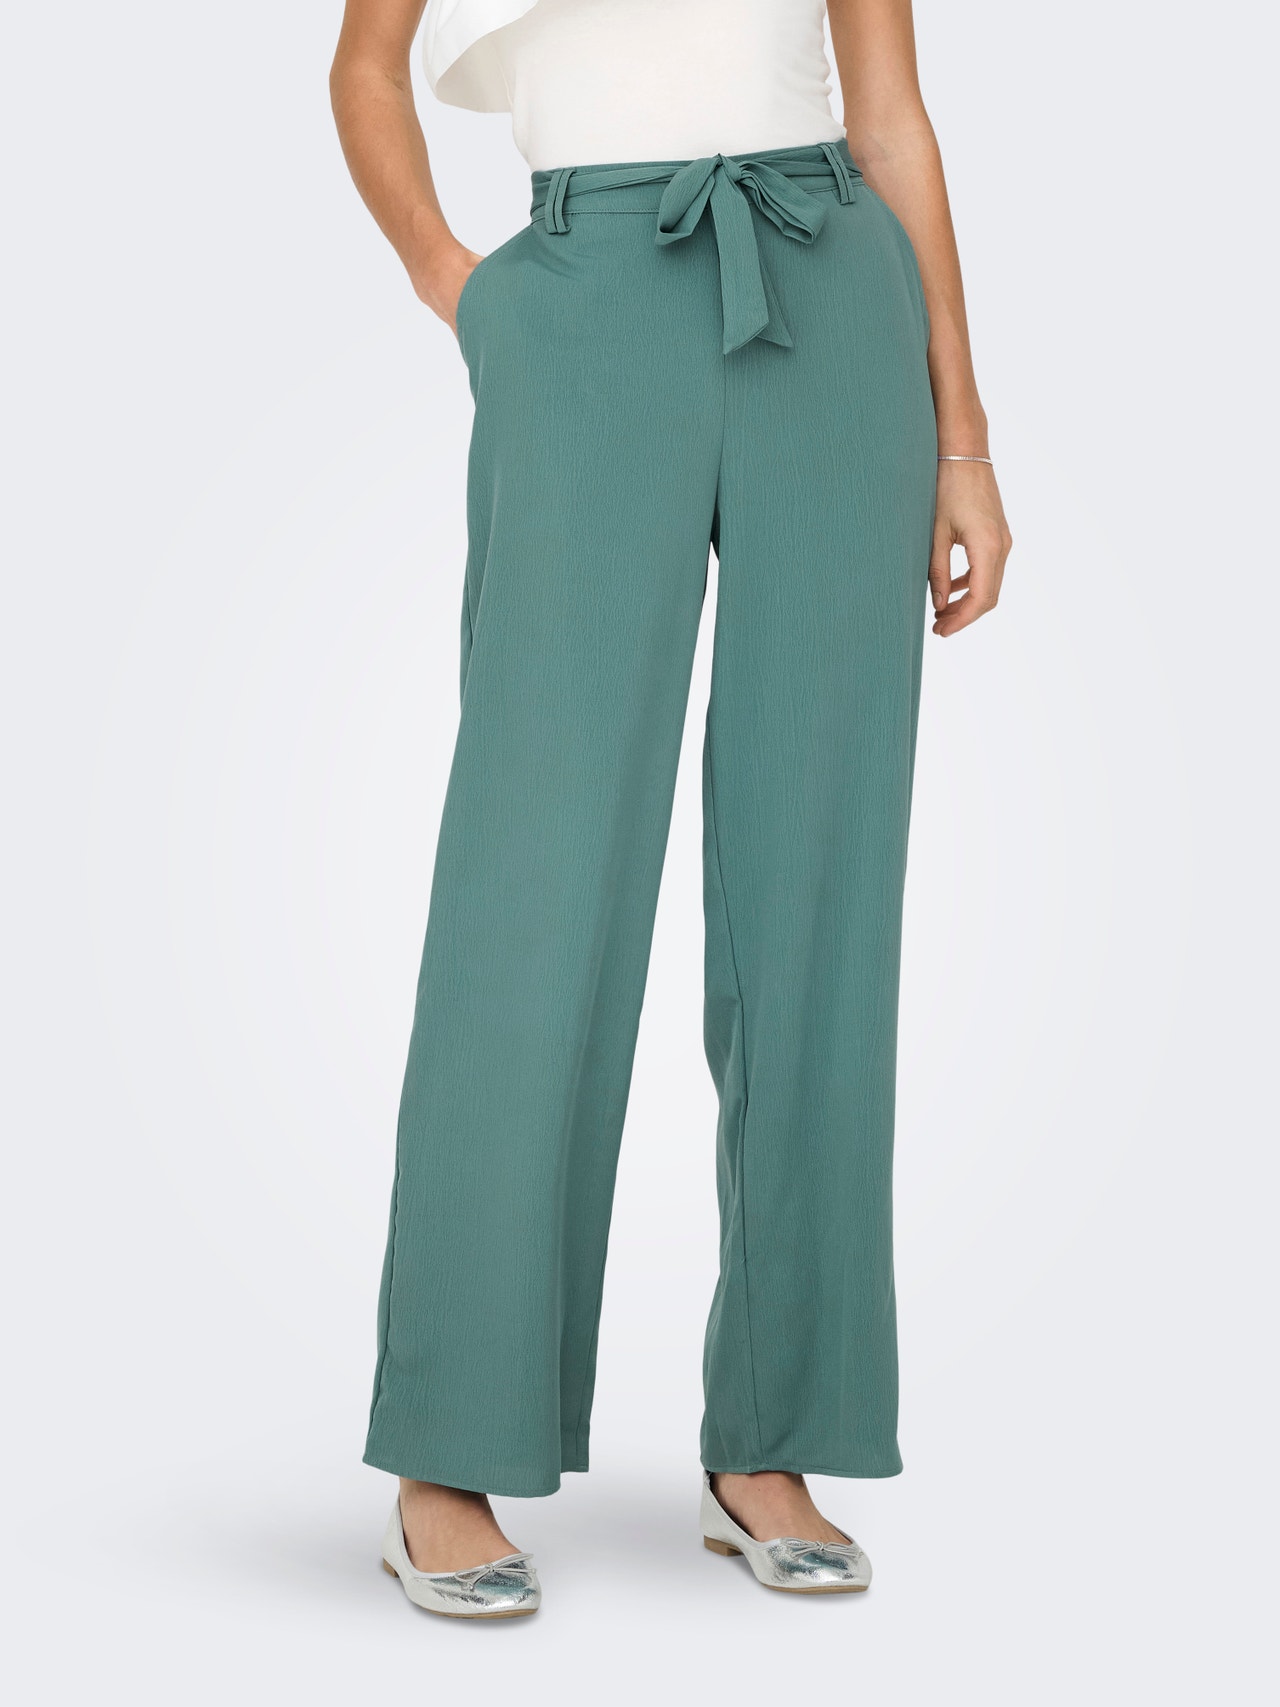 ONLY Trousers with tie belt -Blue Spruce - 15335560